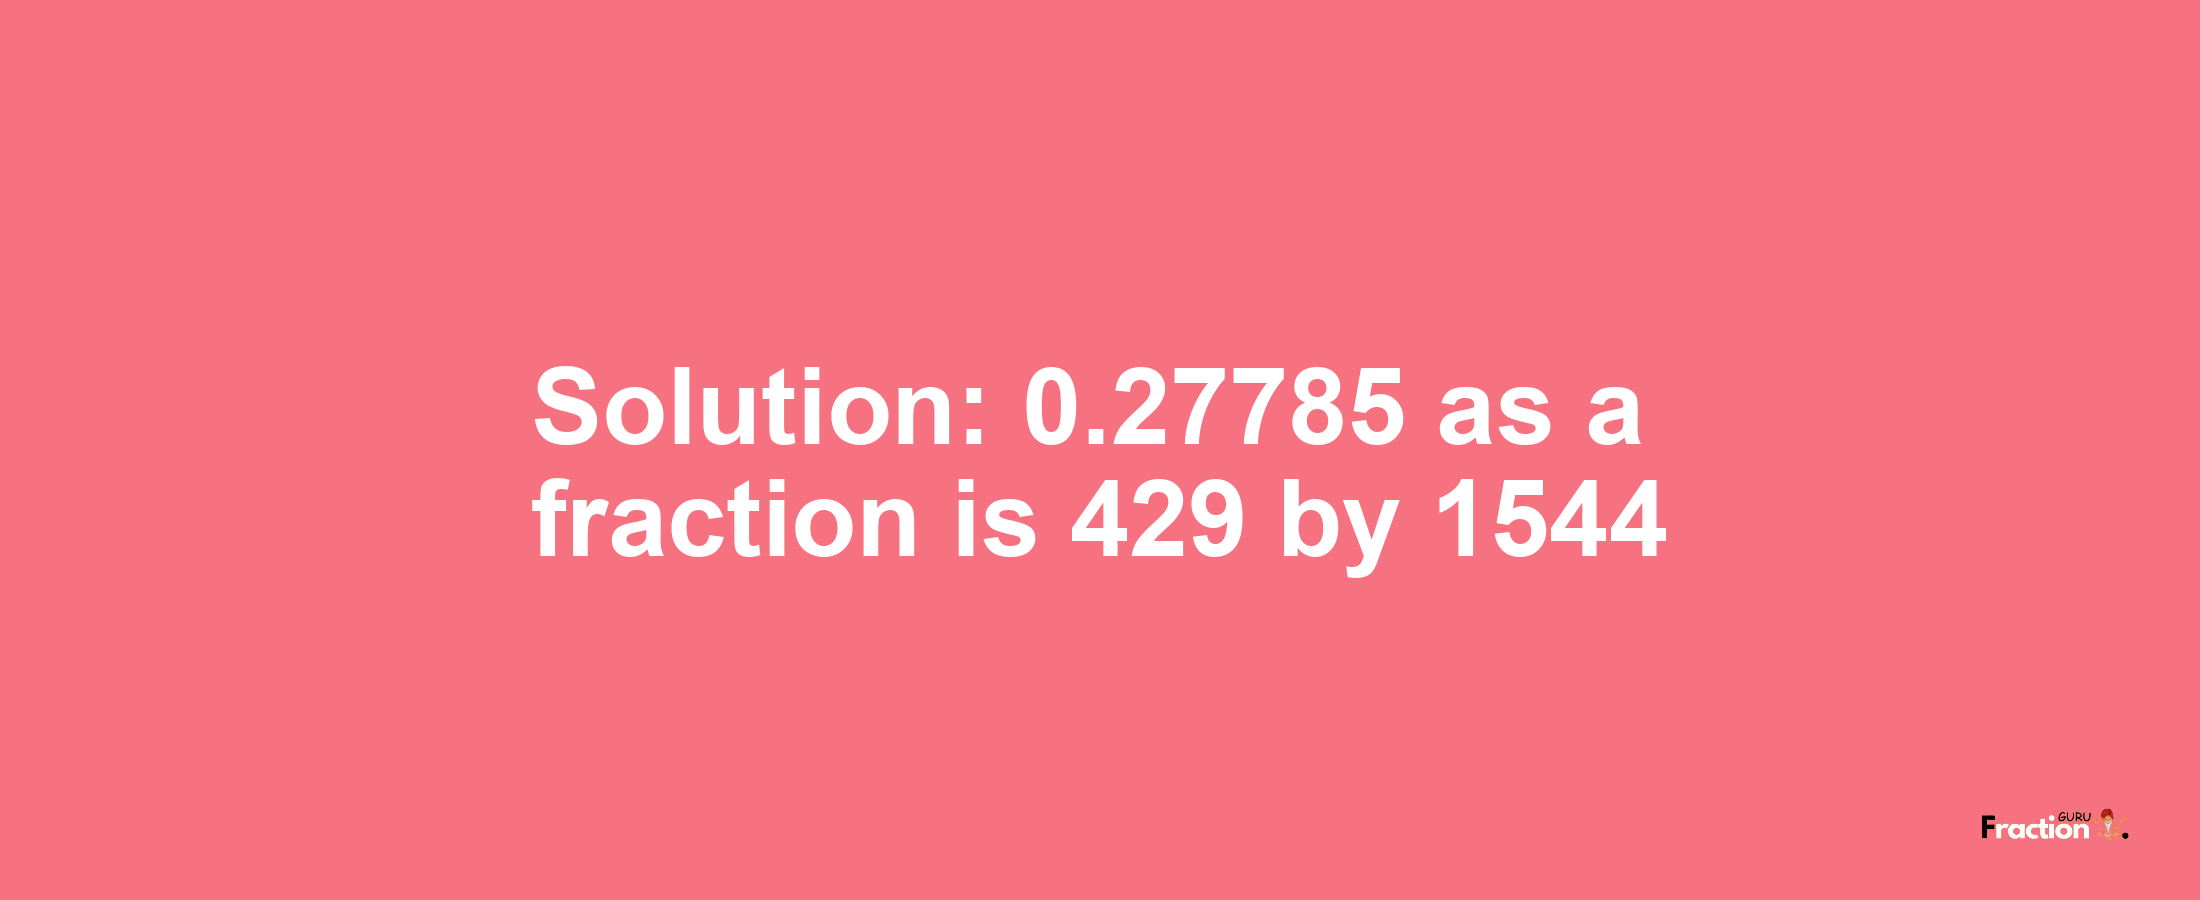 Solution:0.27785 as a fraction is 429/1544